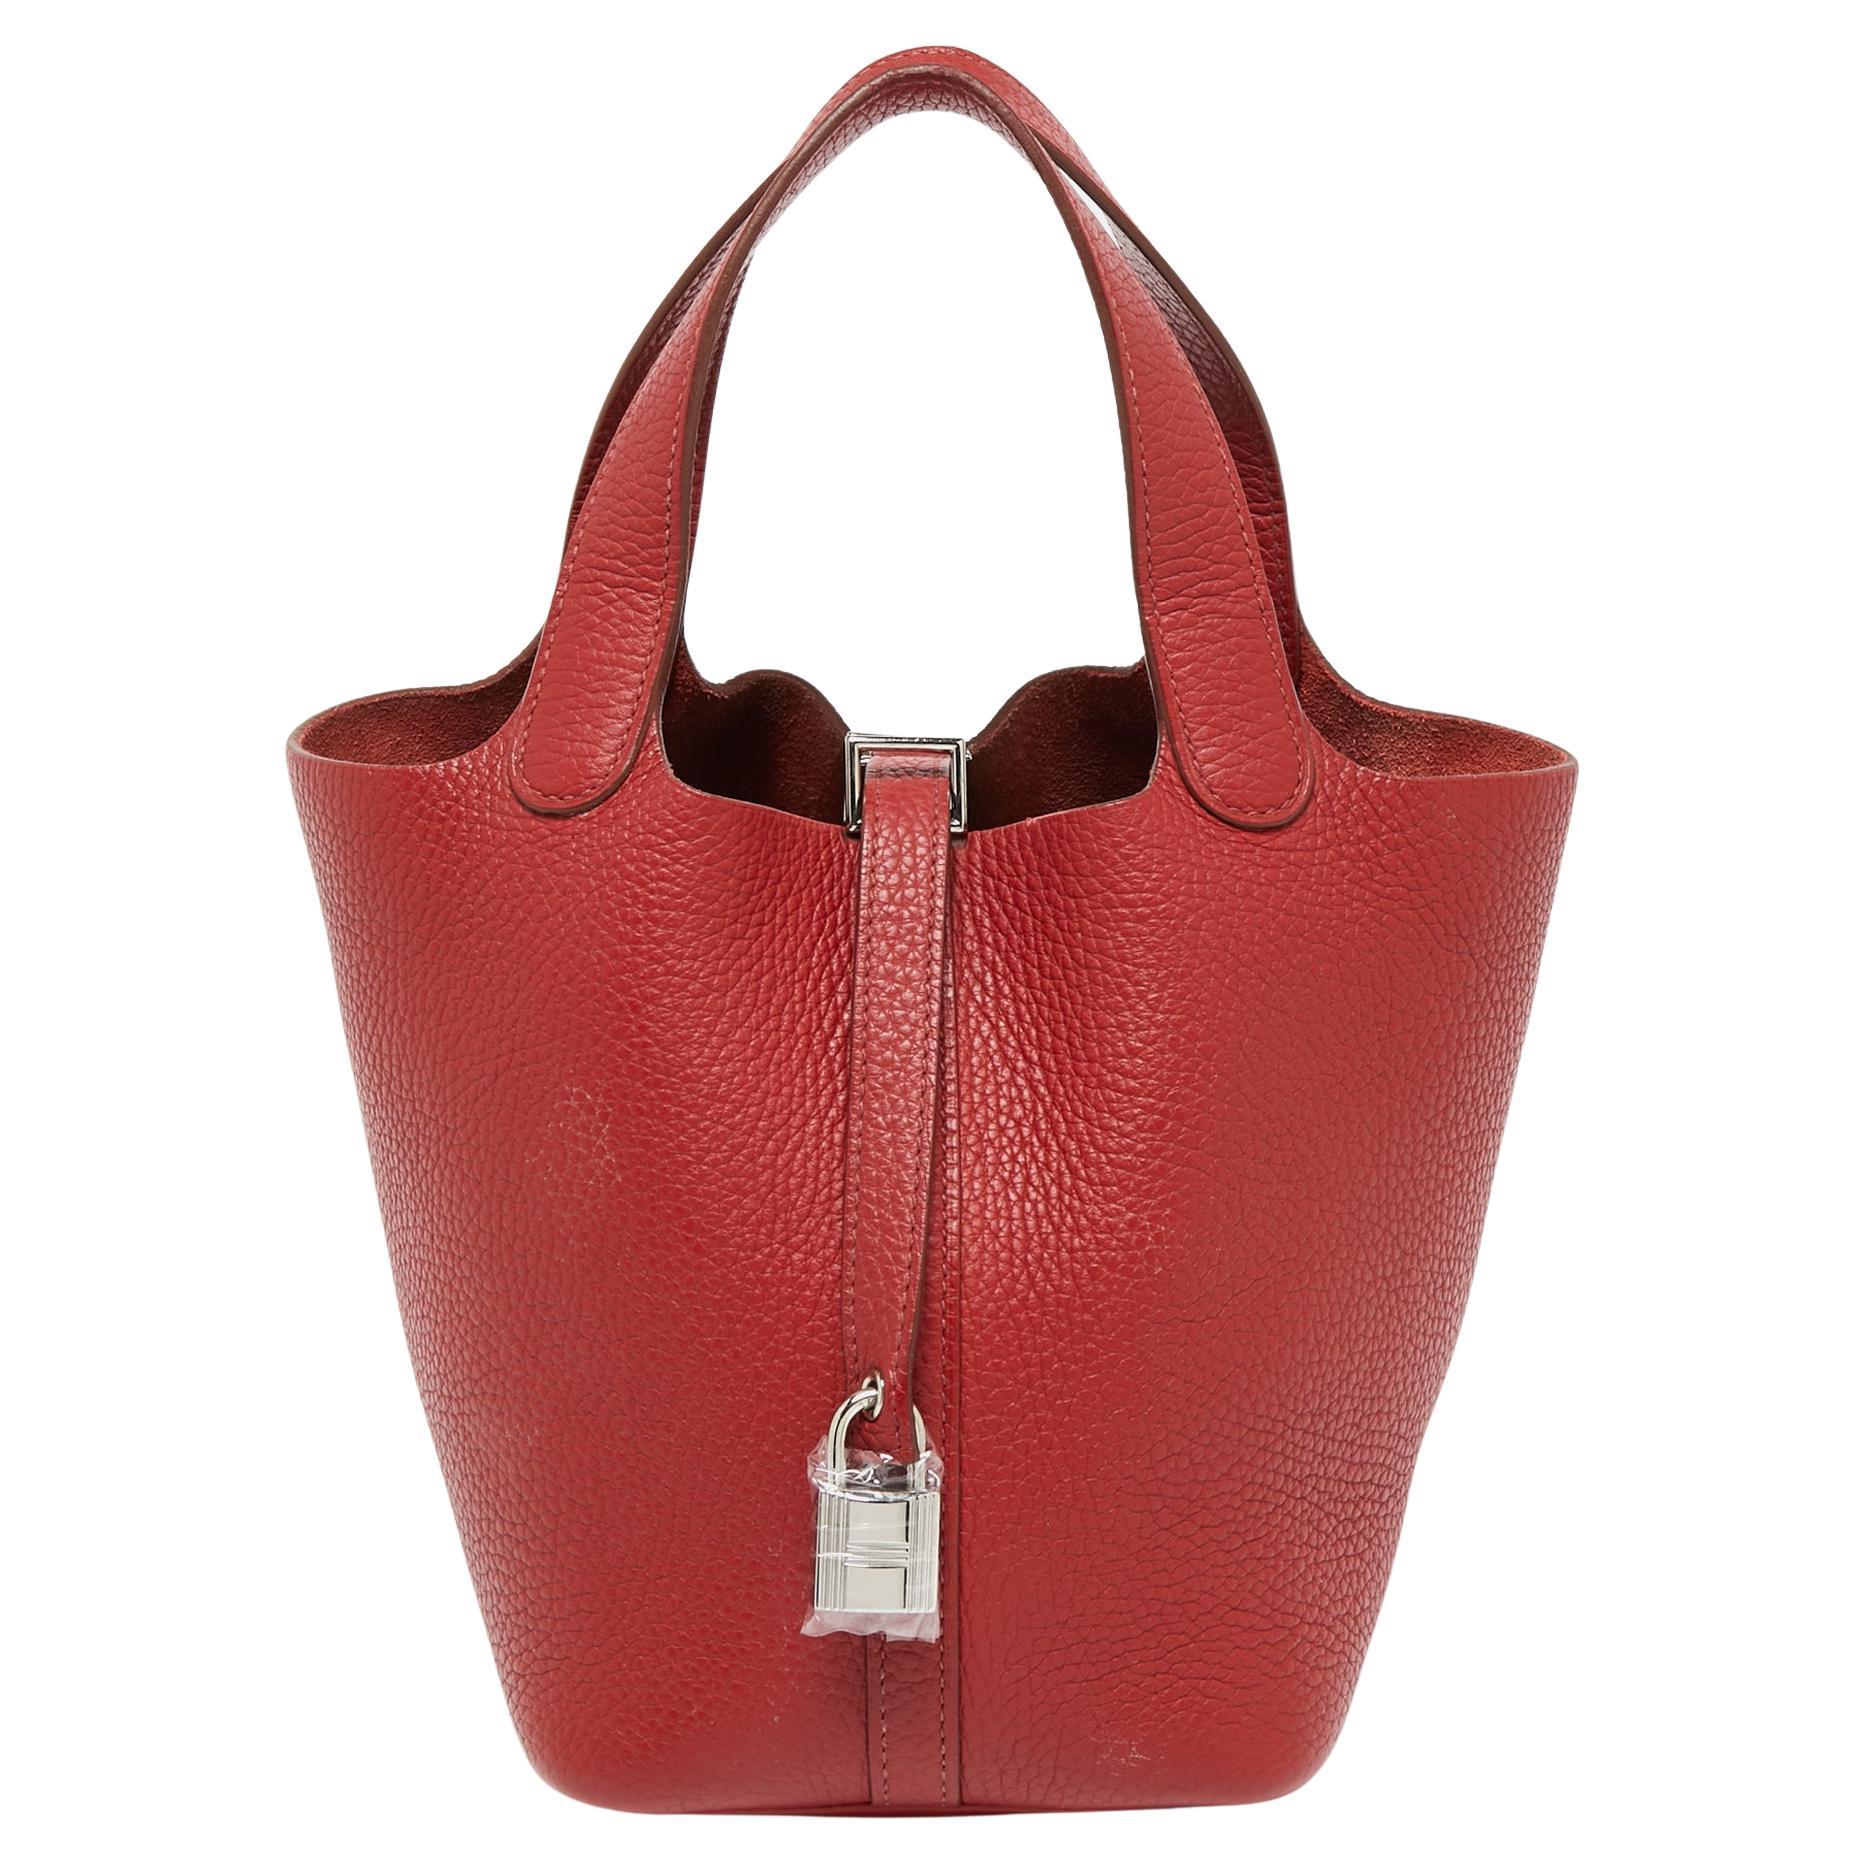 Cheap Hermes Picotin Lock Bags Outlet Sale,Hermes Online Store